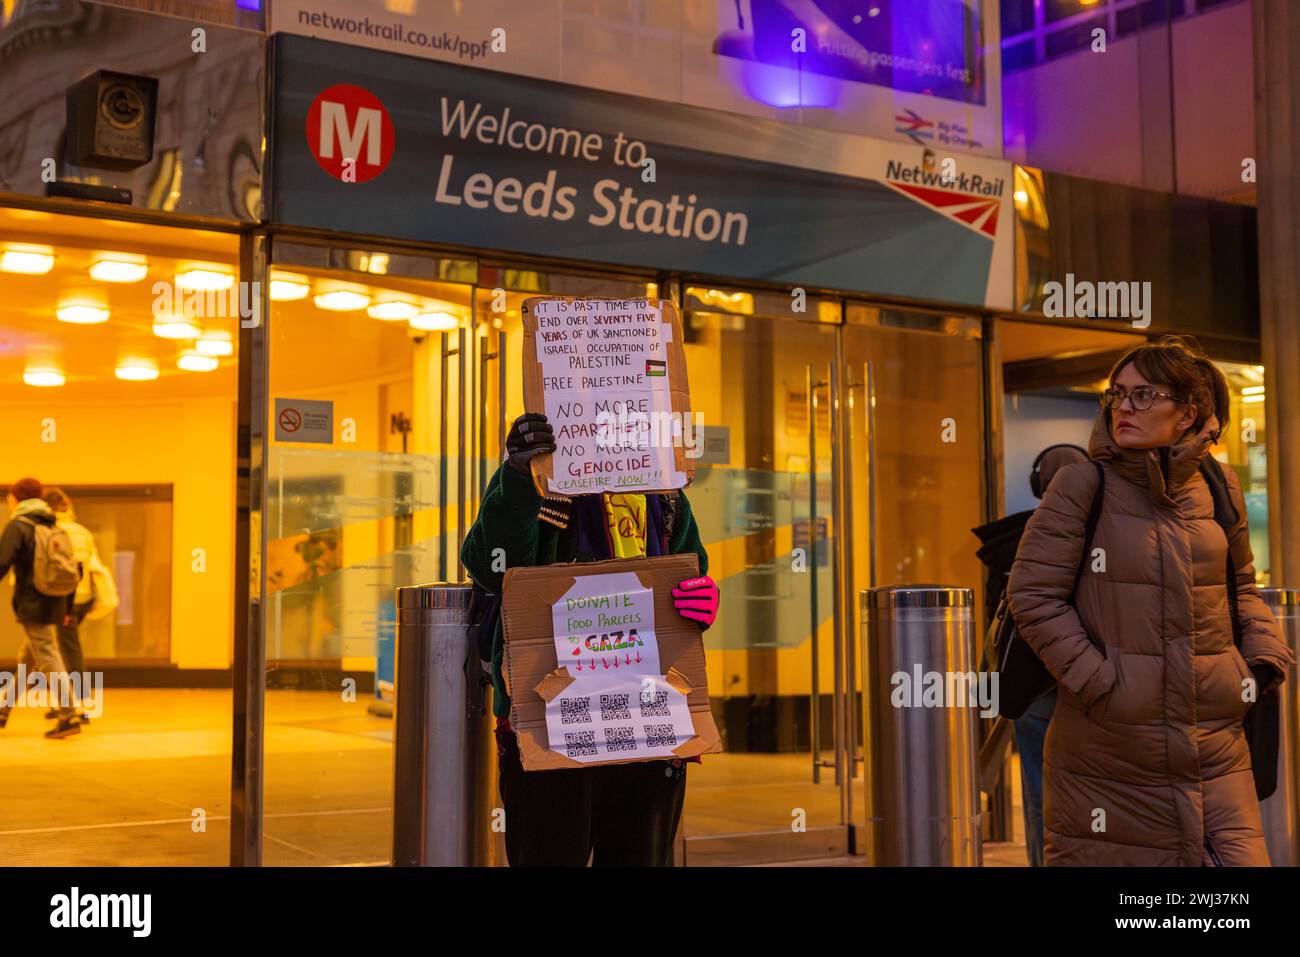 Leeds, UK. 12 FEB, 2024. Protestor holds 'no more aparthied no more genocide banner' outside the entryway to Leeds train station. Credit Milo Chandler/Alamy Live News. Credit Milo Chandler/Alamy Live News Stock Photo